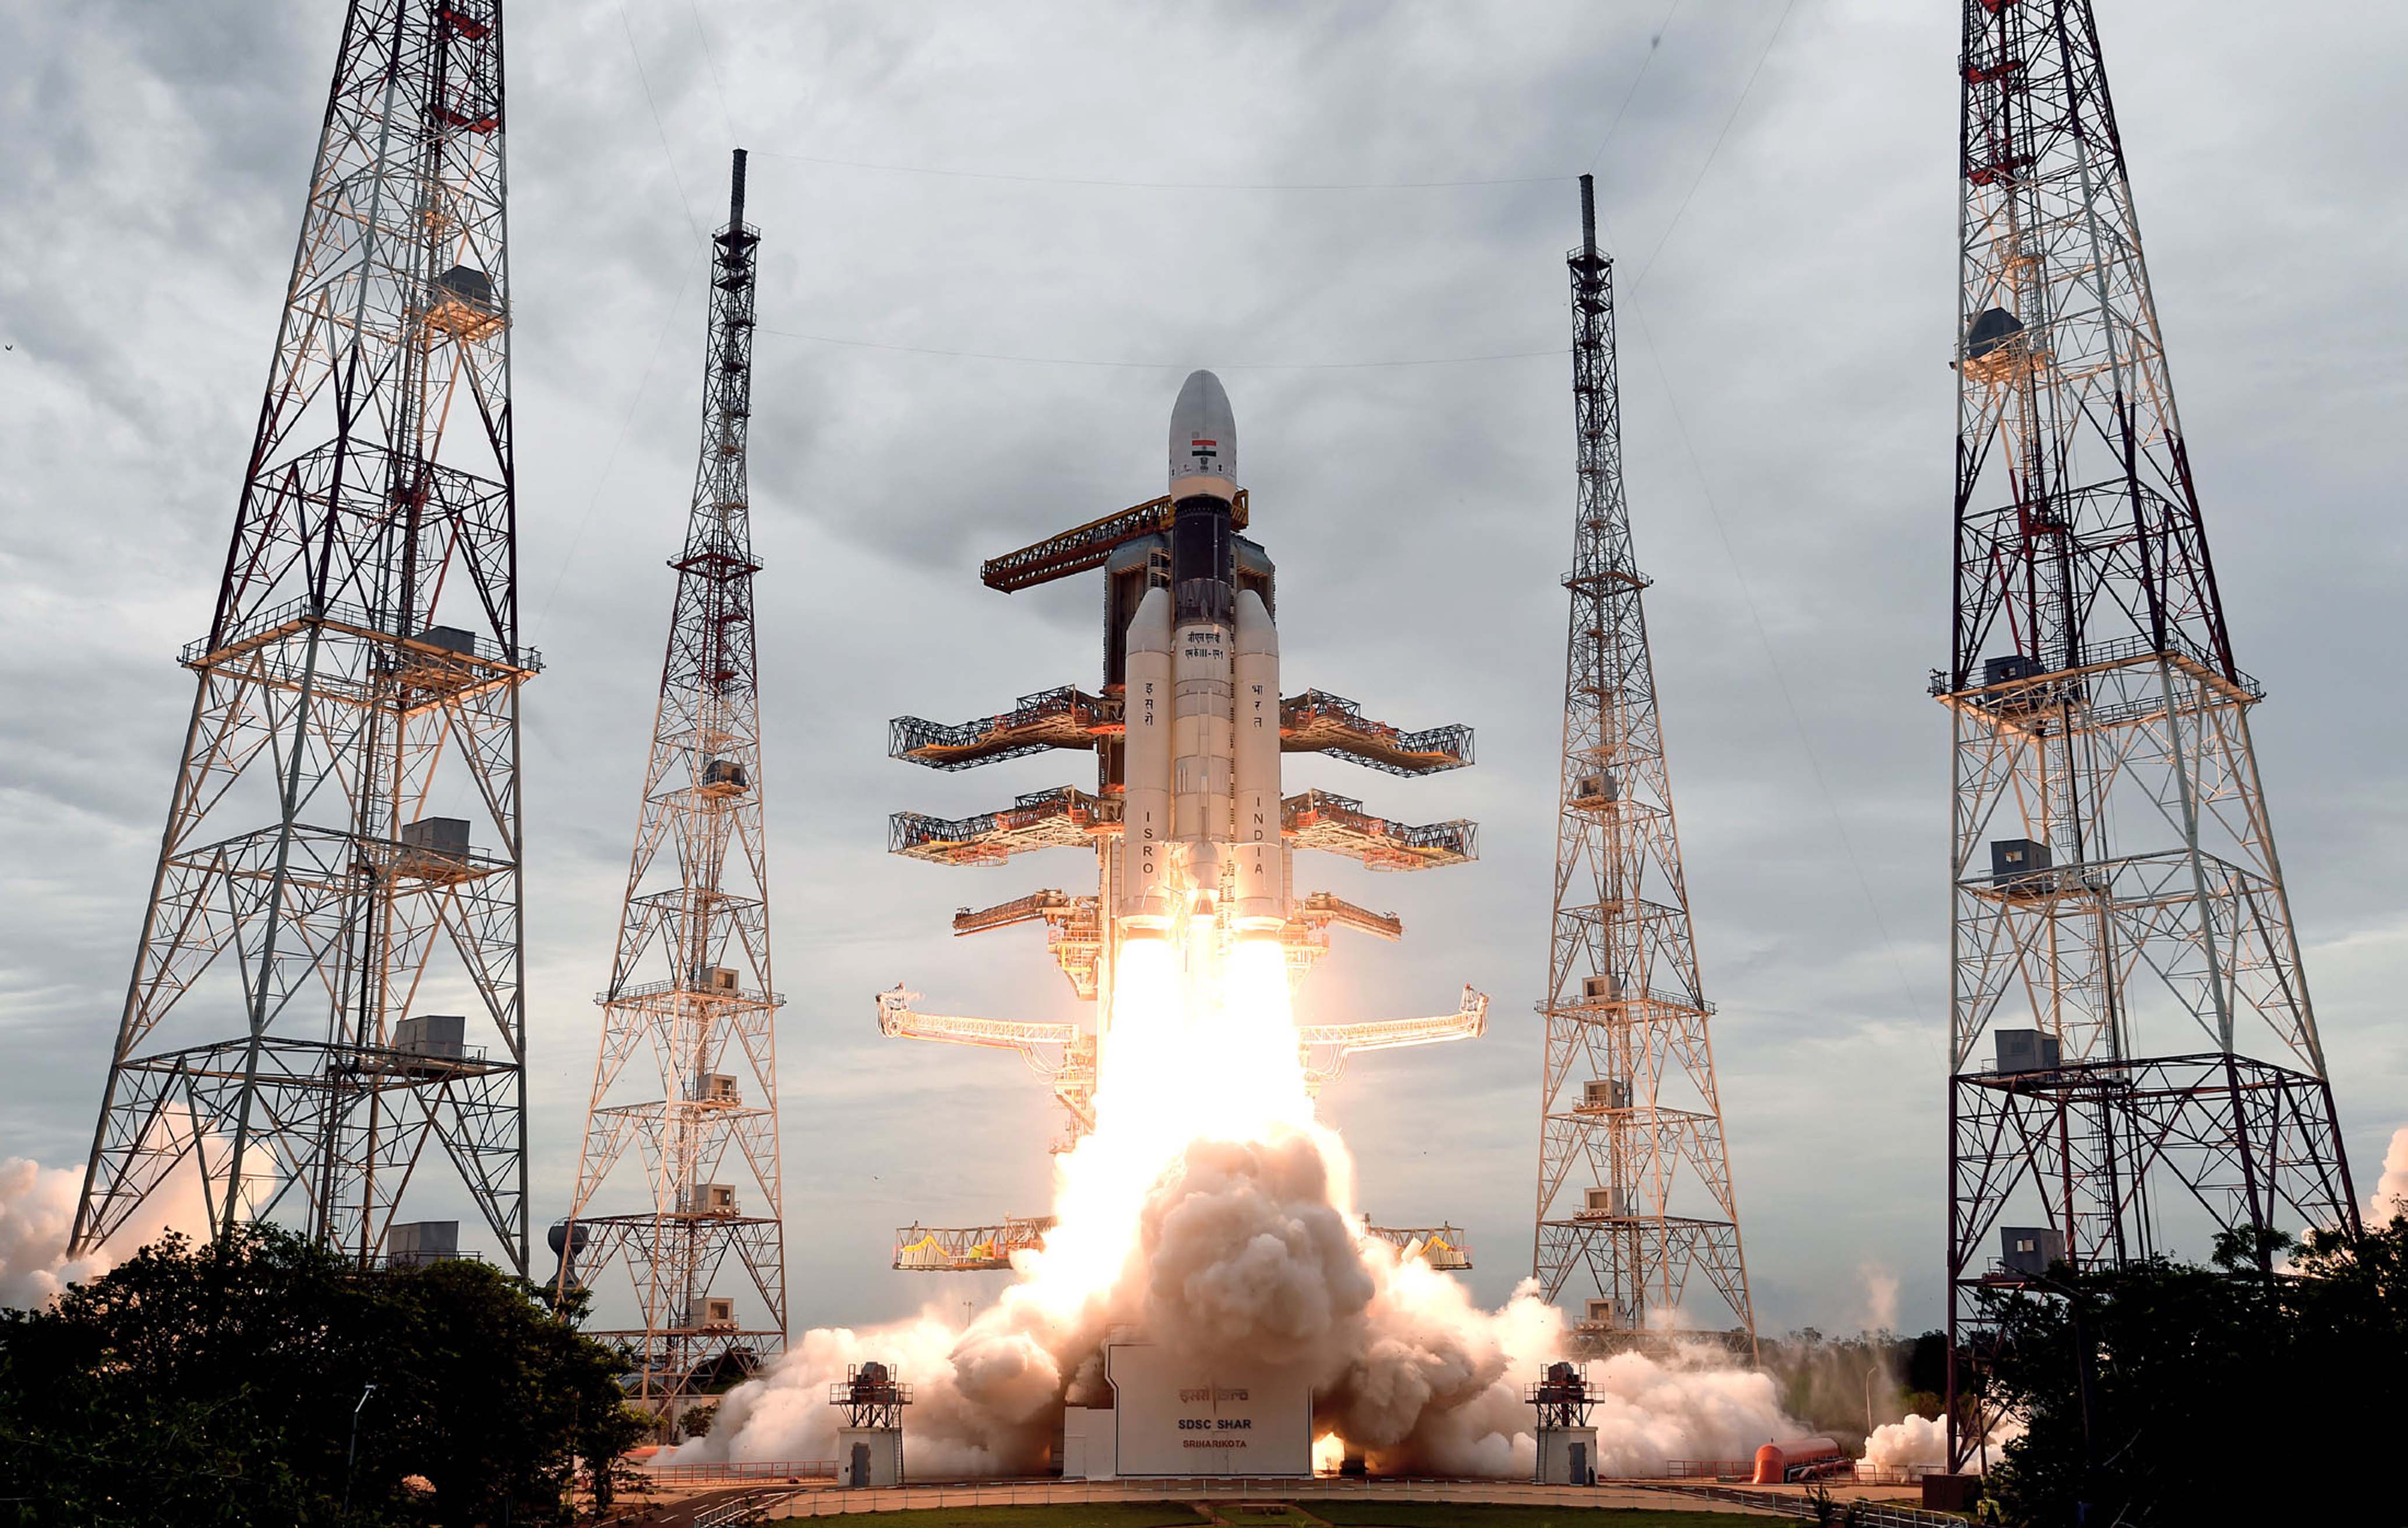 Geosynchronous Satellite Launch Vehicle, GSLV MkIII-M1 rocket, carrying Chandrayaan-2 spacecraft, lifting off from the Second Launch Pad at the Satish Dhawan Space Centre, Sriharikota, in Andhra Pradesh on Monday.